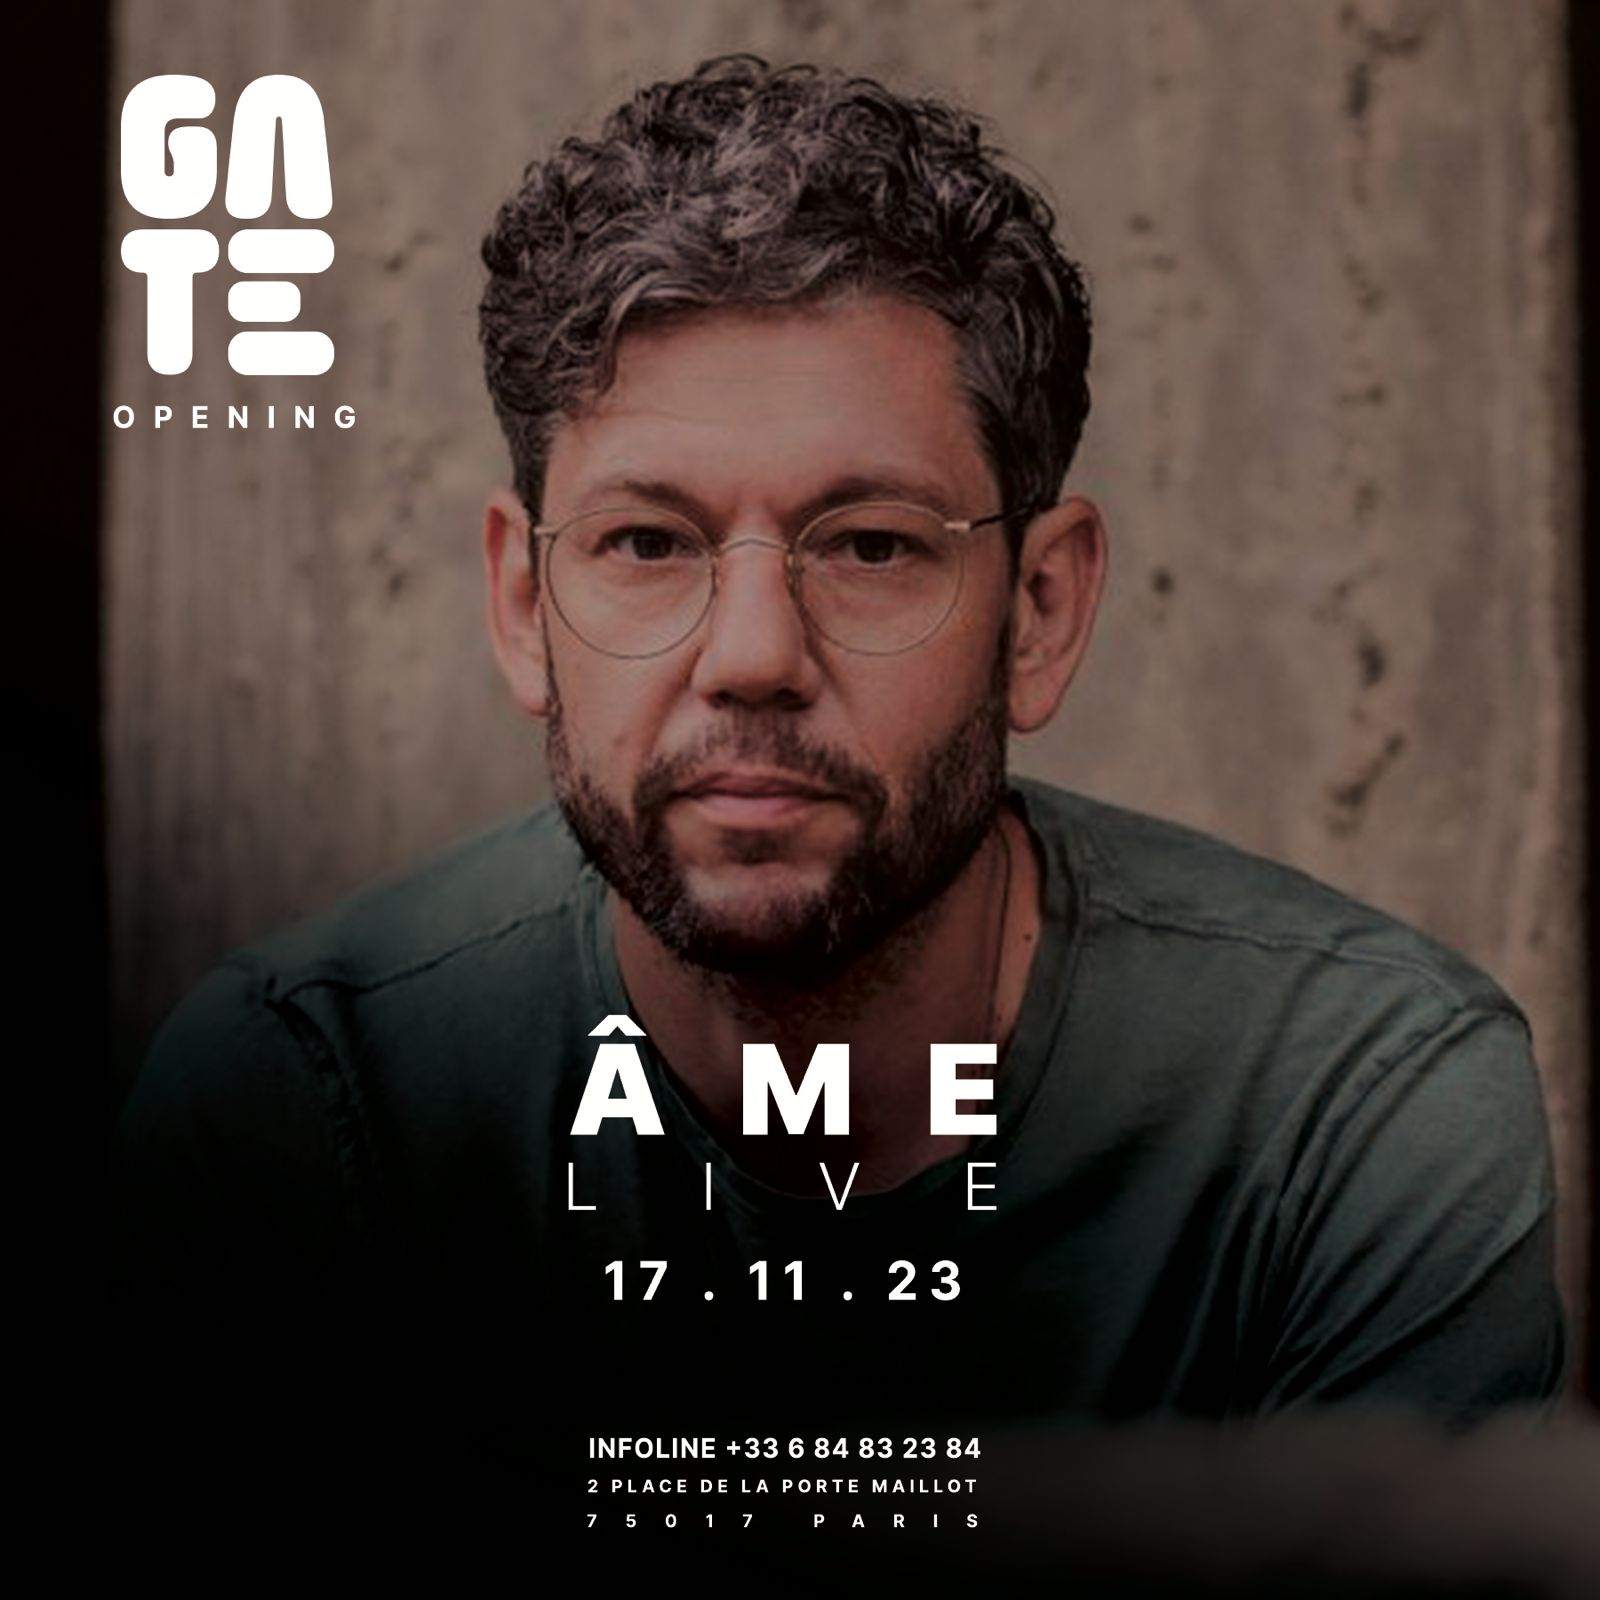 GATE club opening with Âme live - フライヤー裏